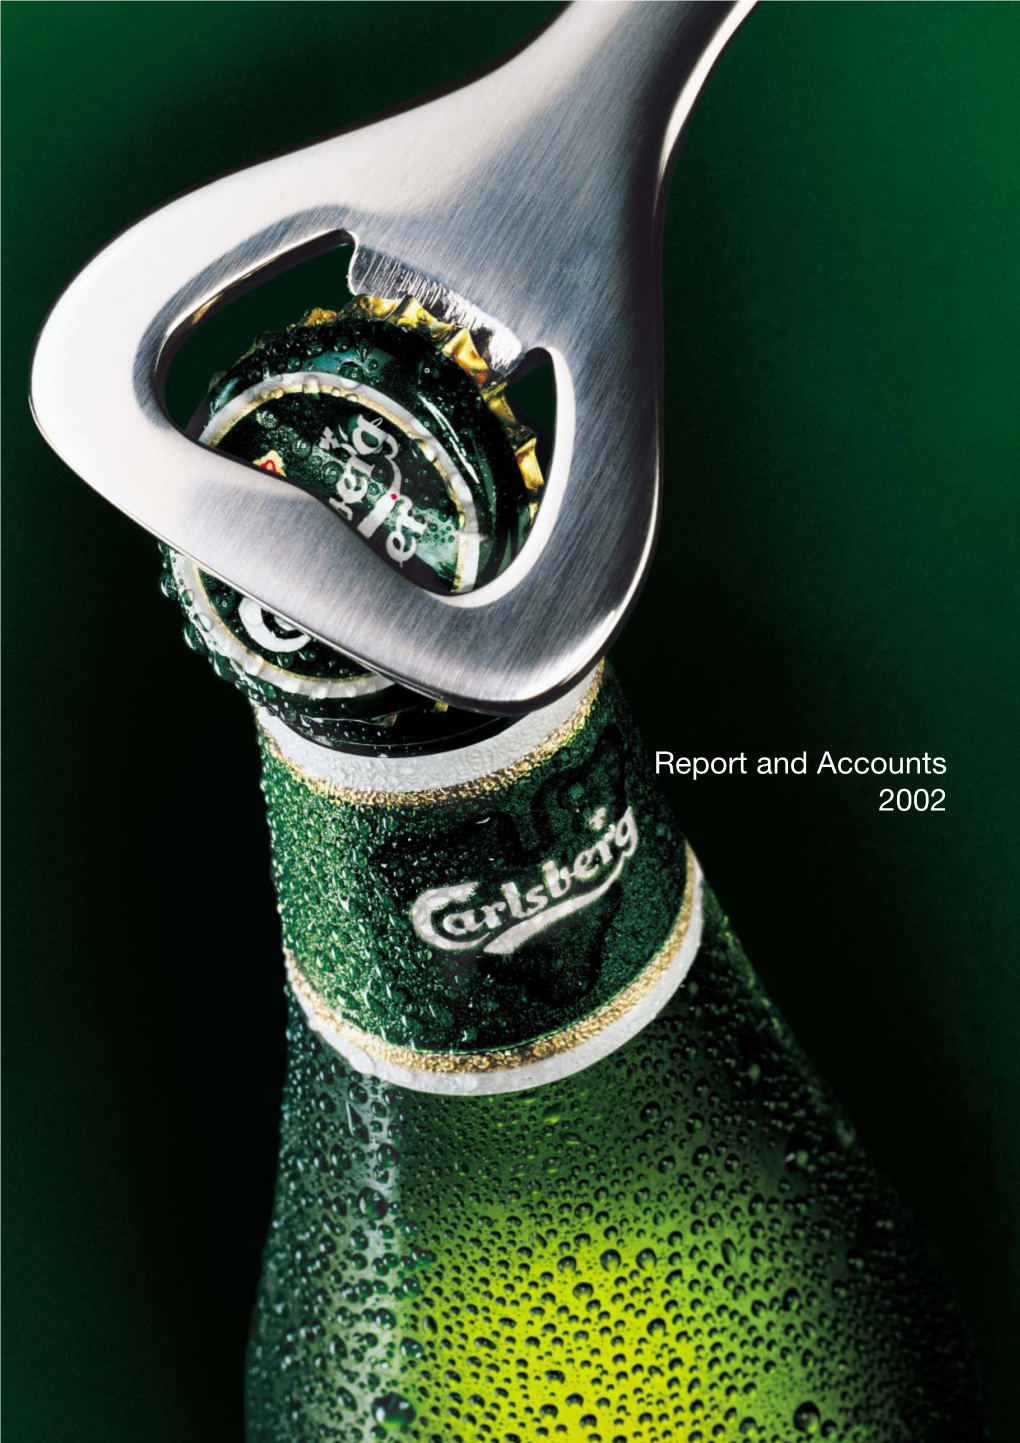 Report and Accounts 2002